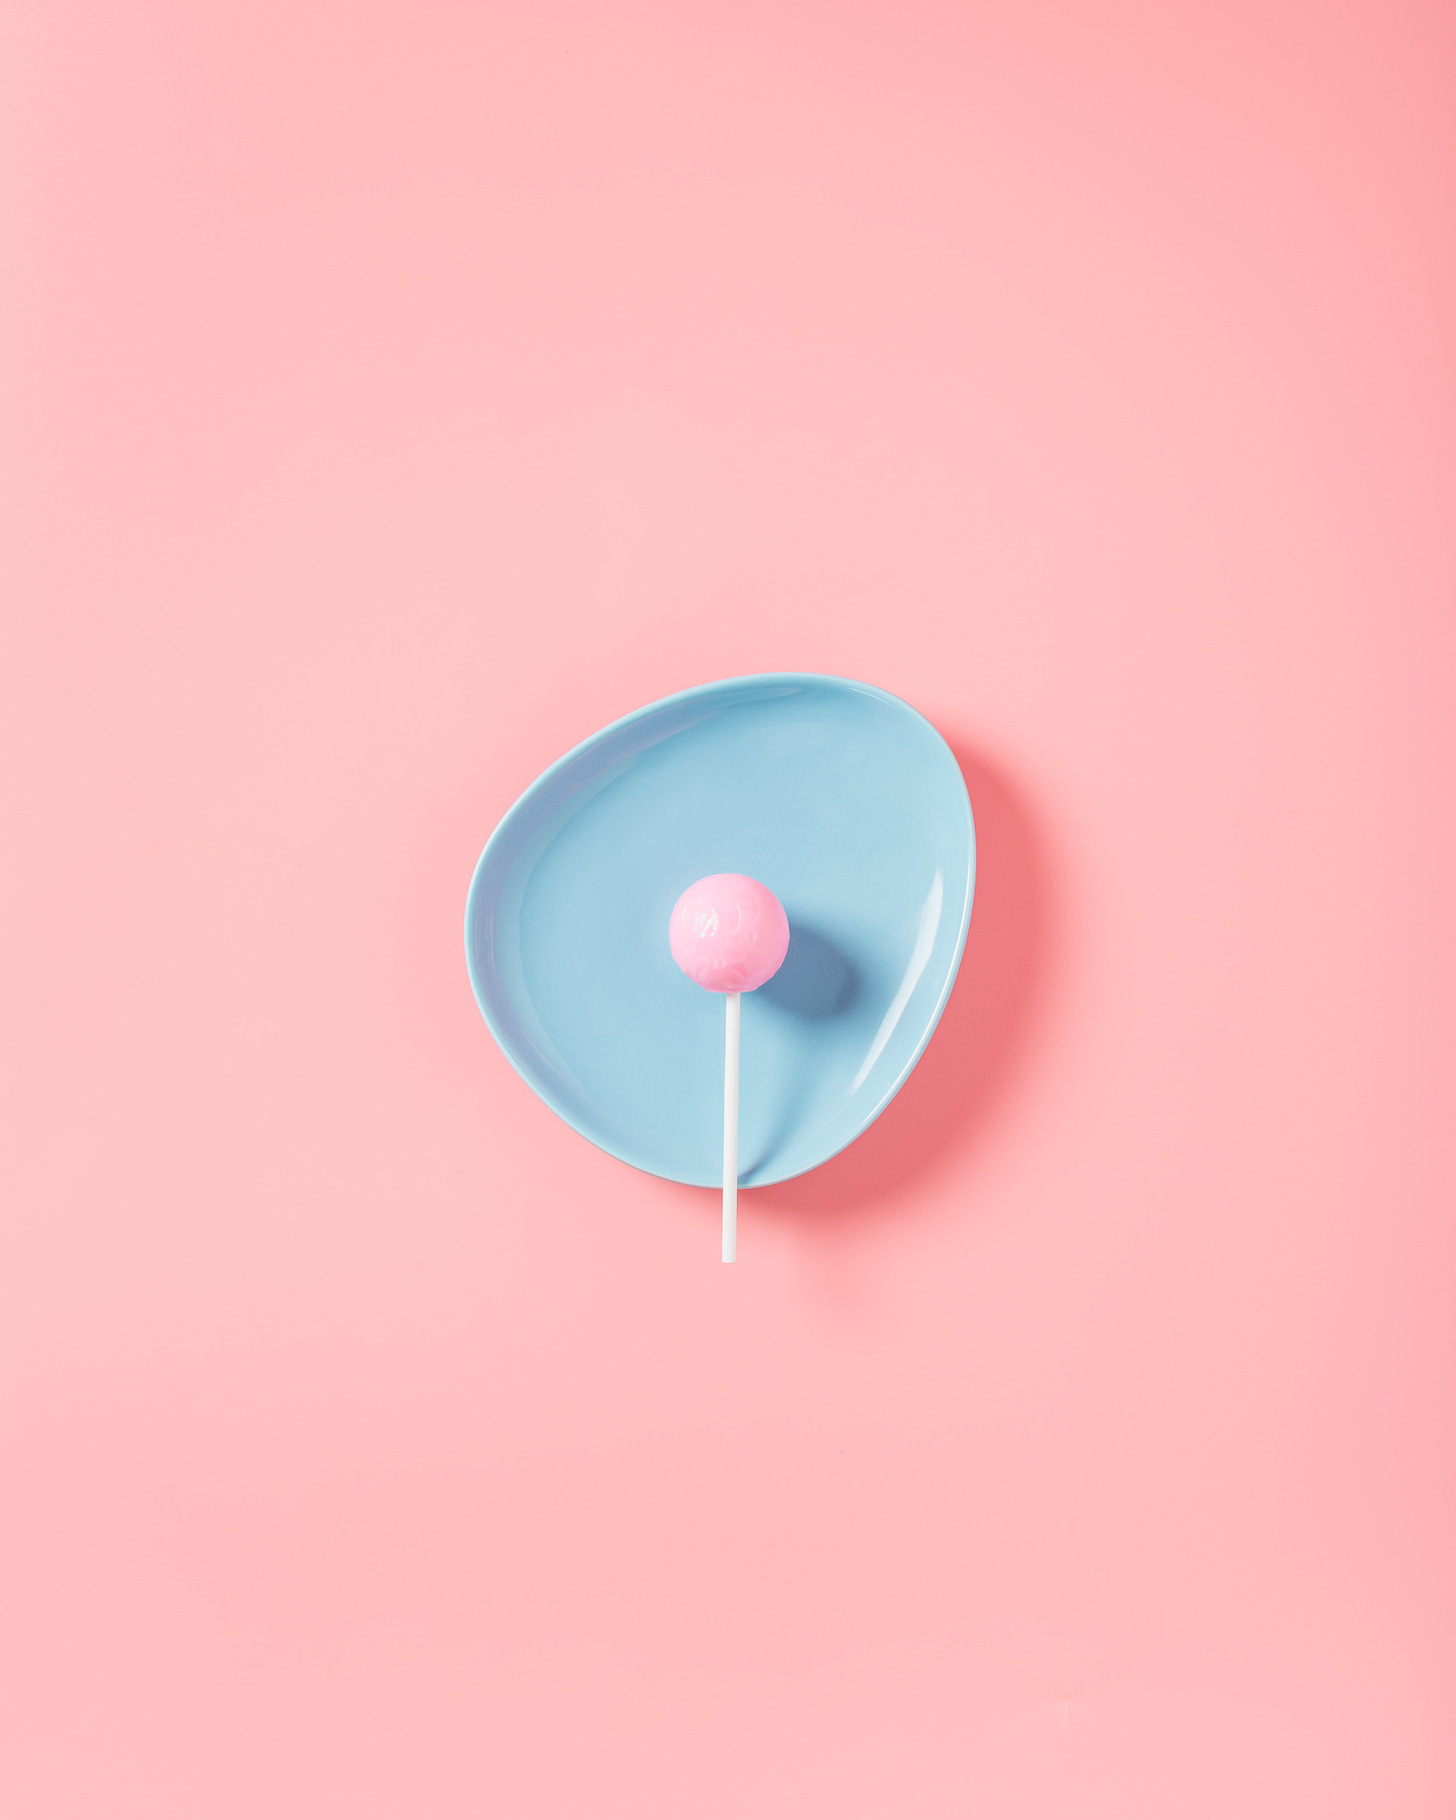 pink sucker on a blue plate against a pink background, very simple